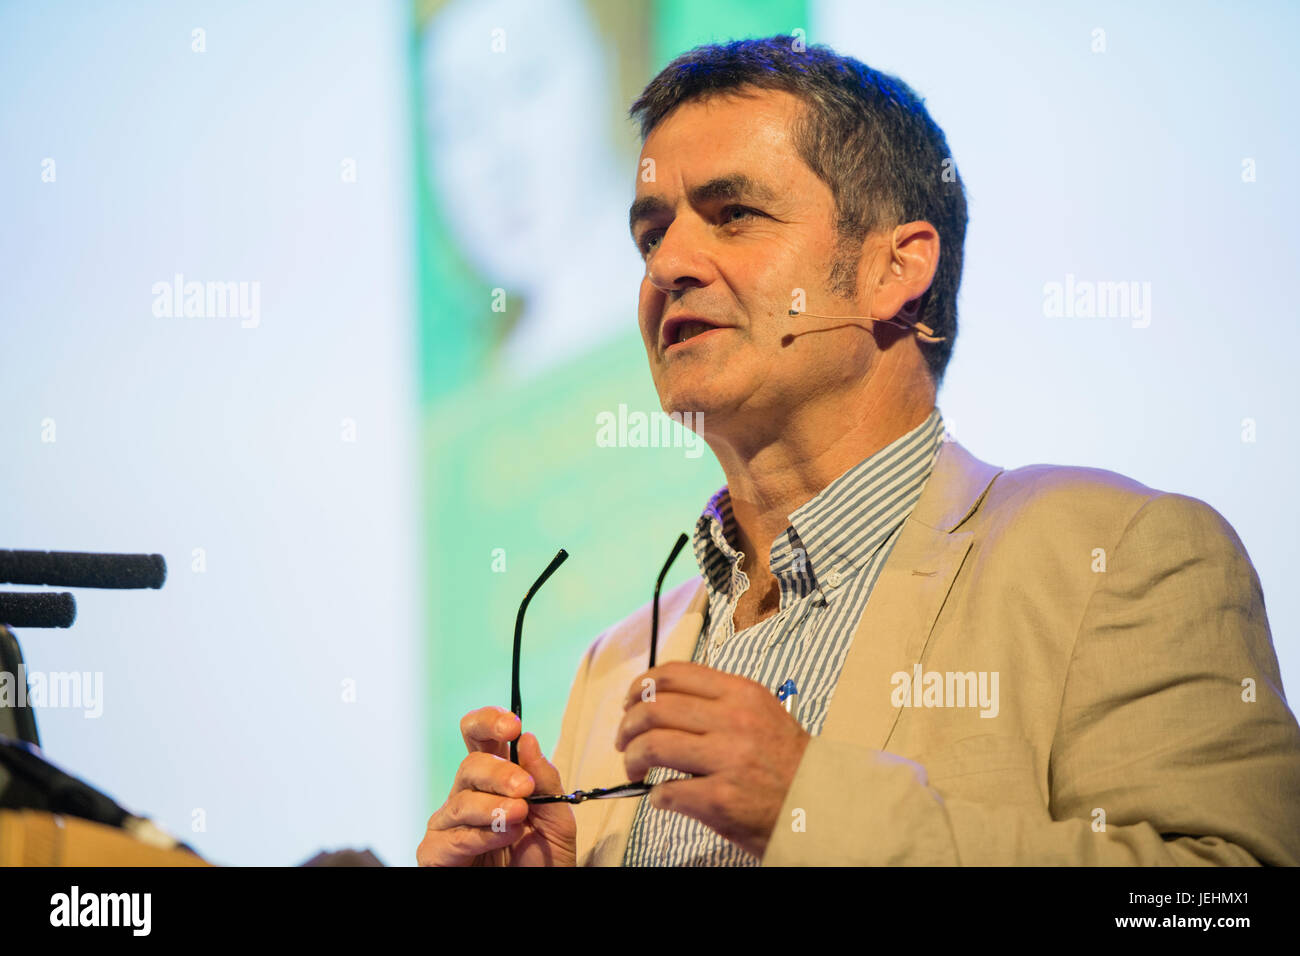 Giles Tremlett , journalist, author and historian based in Madrid, Spain, who has spent most of his career writing for The Guardian and The Economist, talking about his book 'Isabella of Castile'  at the 2017 Hay Festival of Literature and the Arts, Hay on Wye, Wales UK Stock Photo